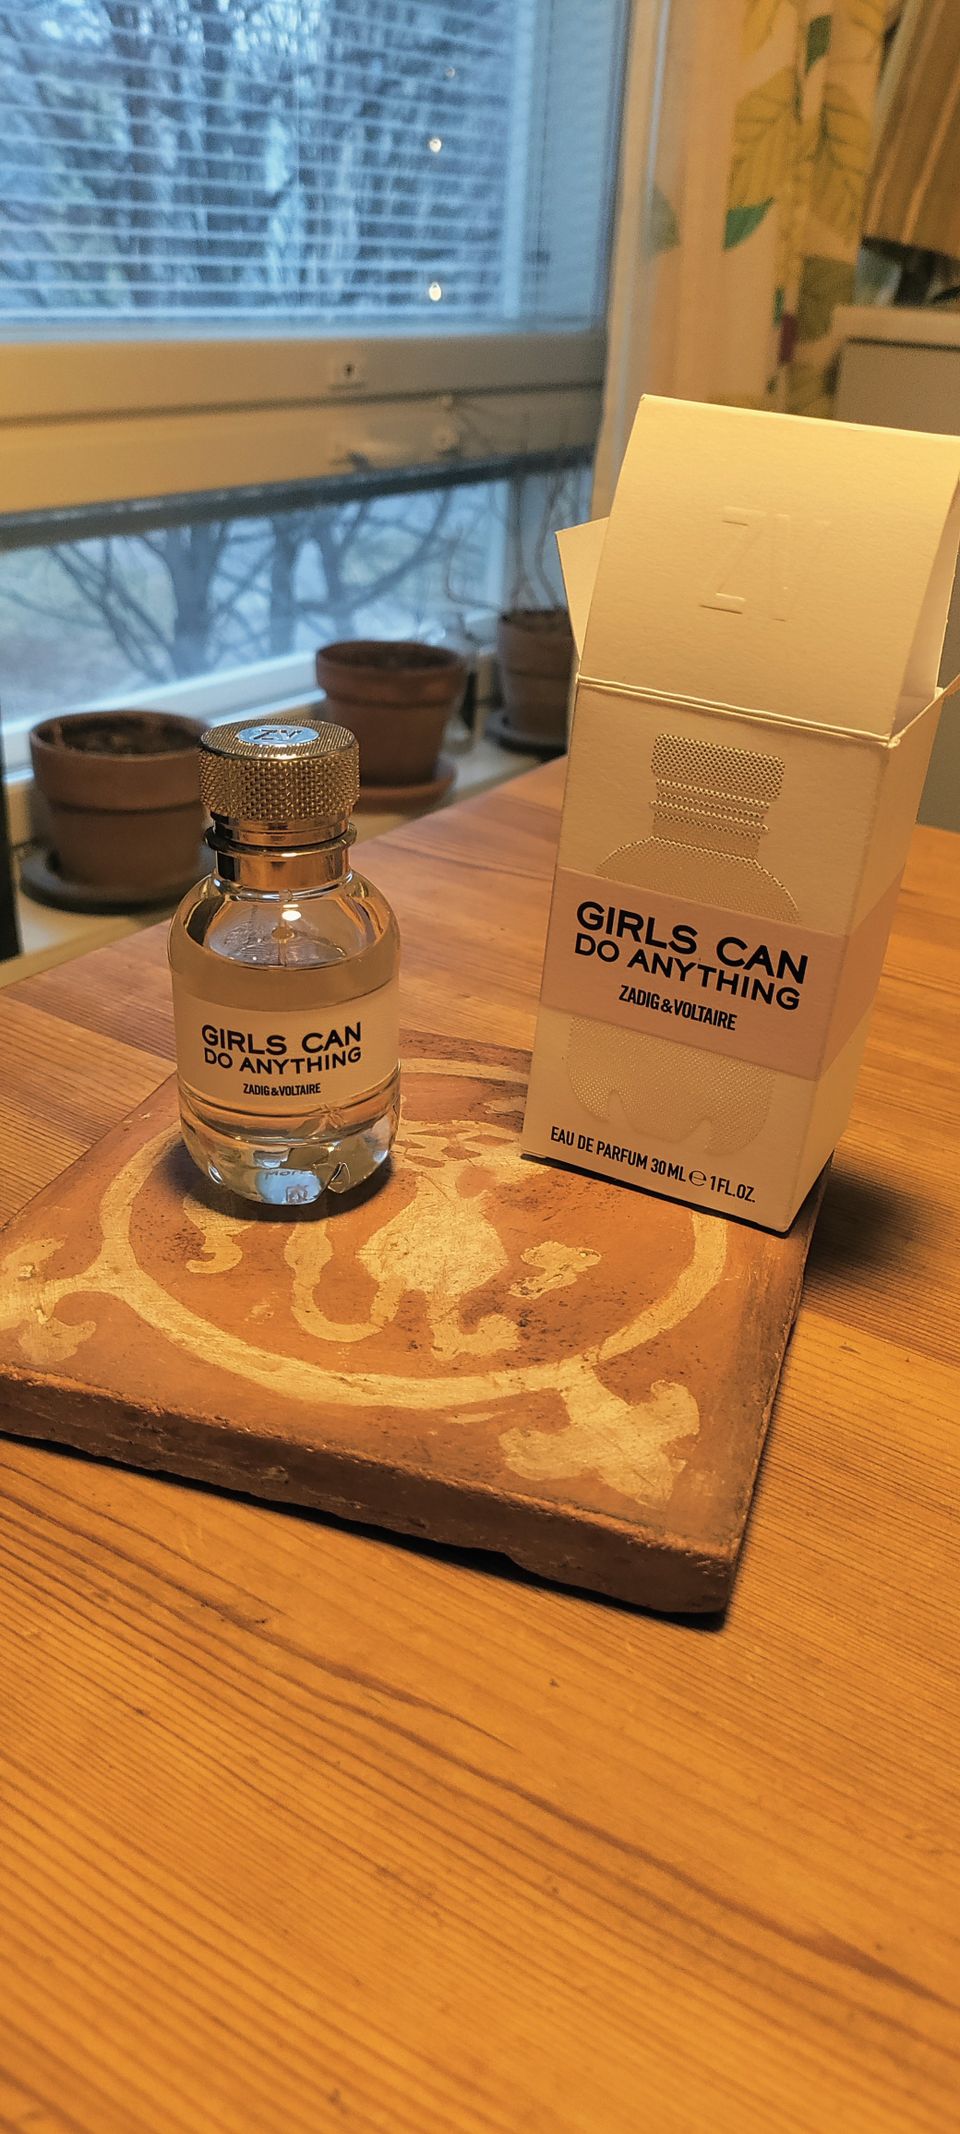 Girls Can Do Anything EDP